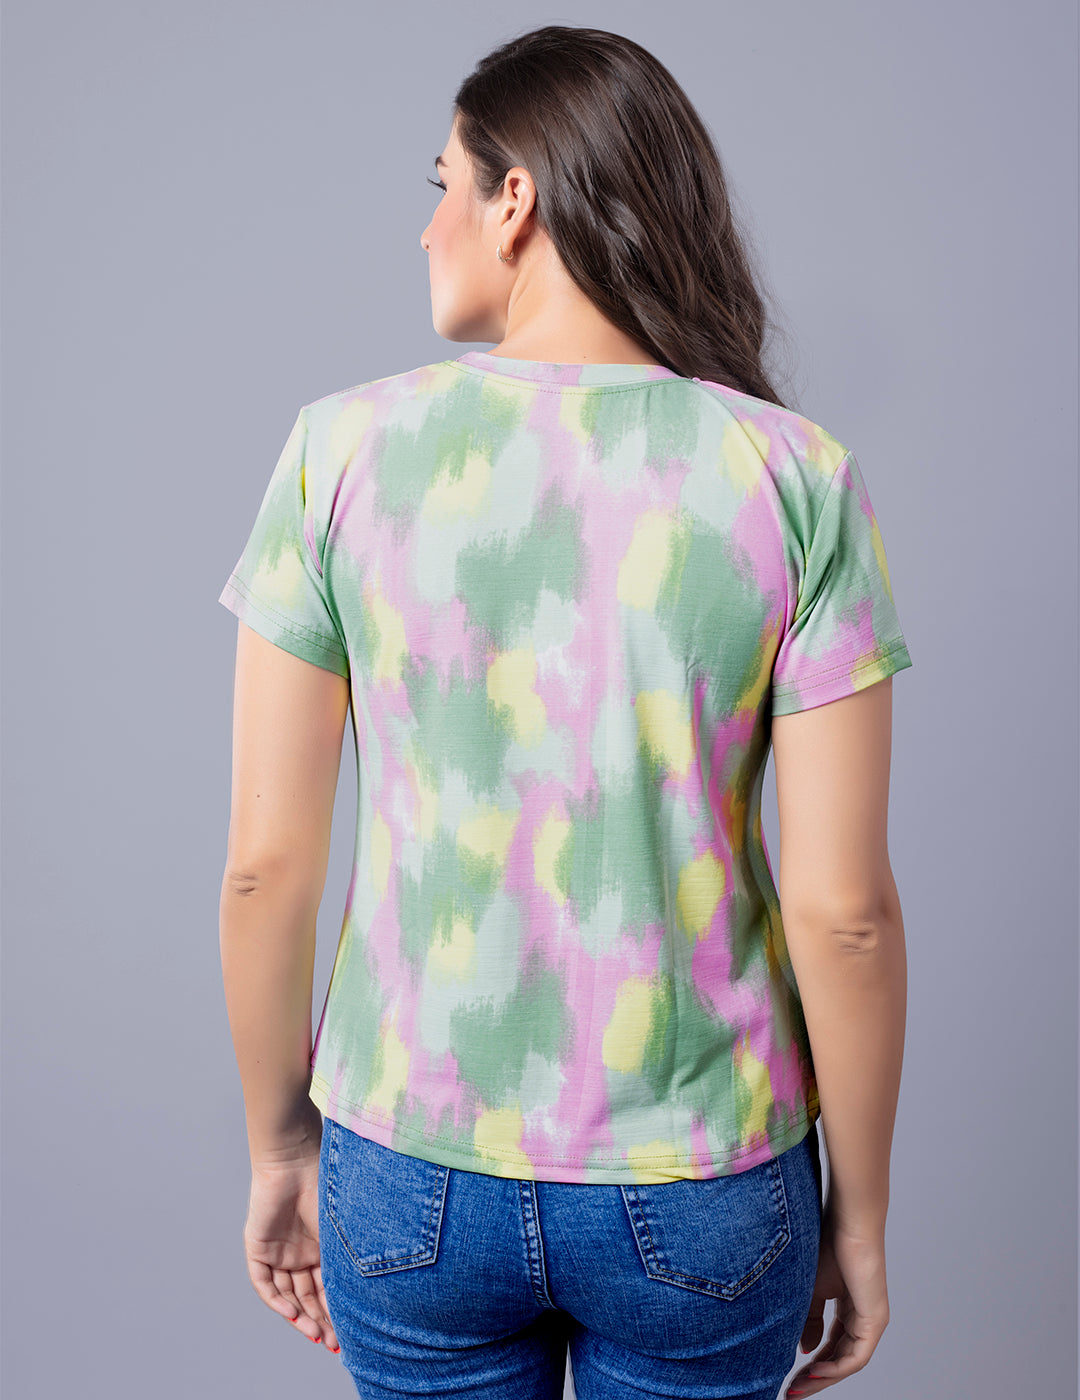 Stylish Tie and Dye T-Shirt online in India at best prices  